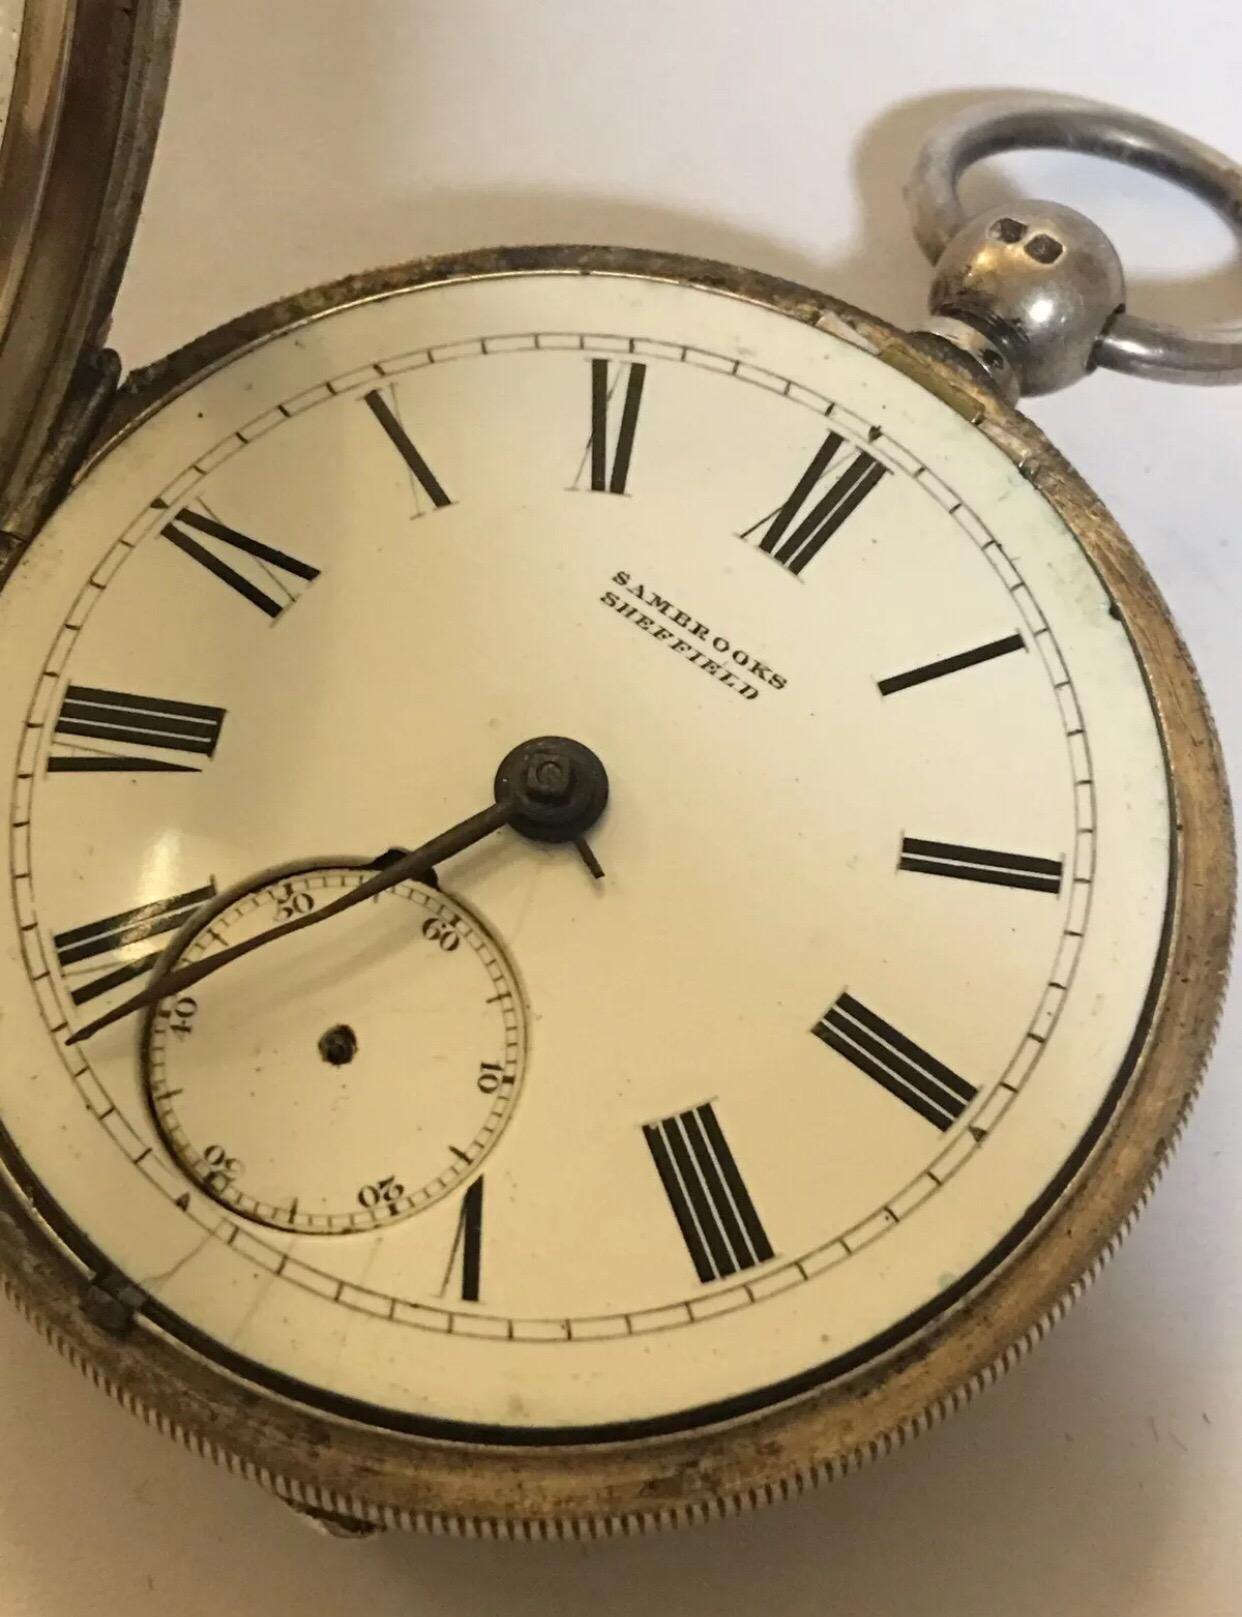 Women's or Men's English Fusee Silver Pocket Watch by Sambrooks, Sheffield for Spares or Repair